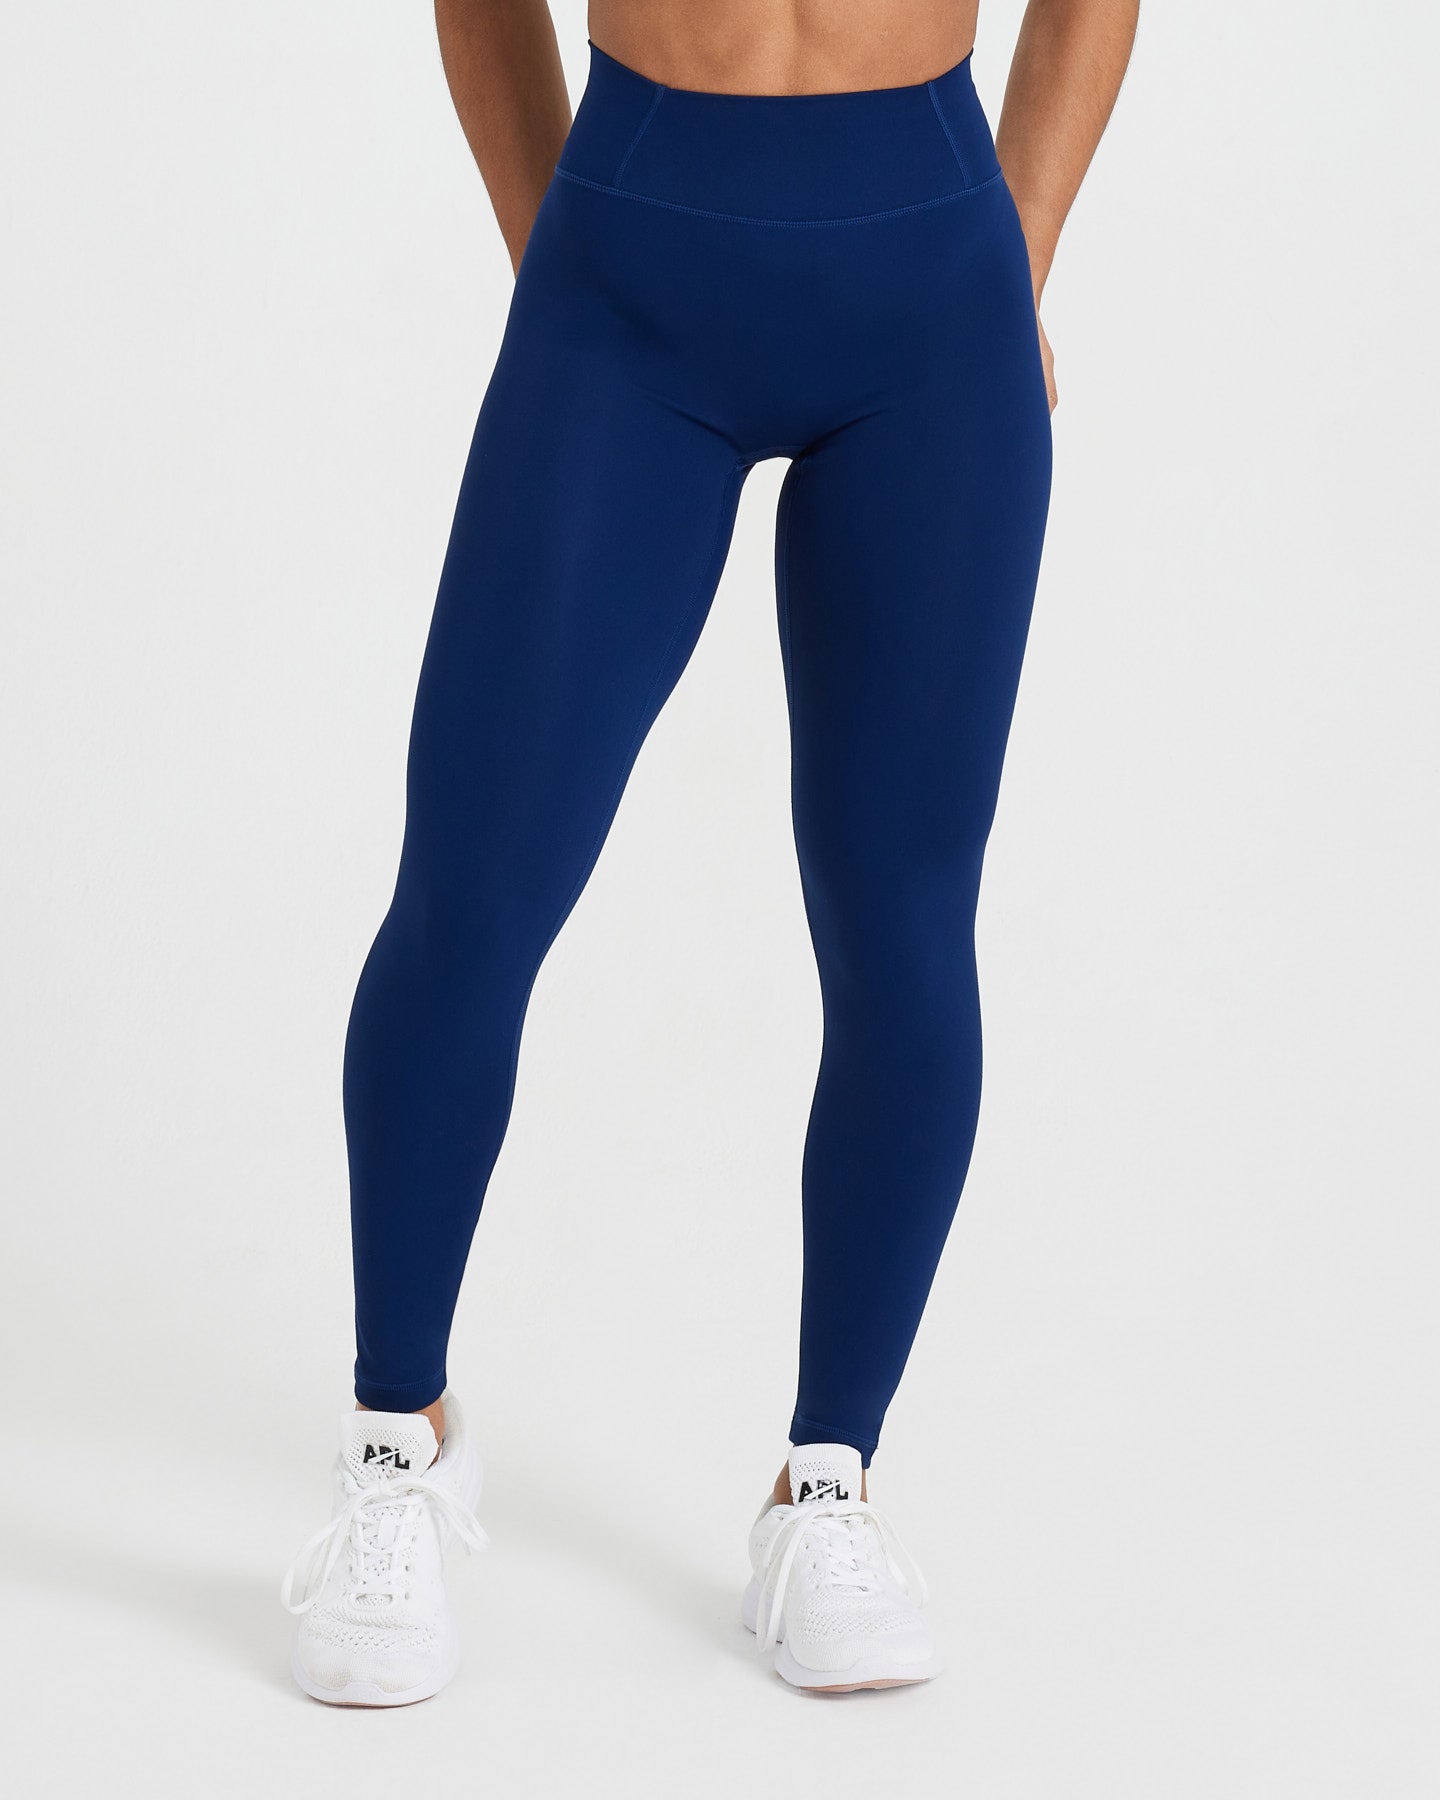 Women\'s Leggings with ultimate Glute Separation | Oner Active